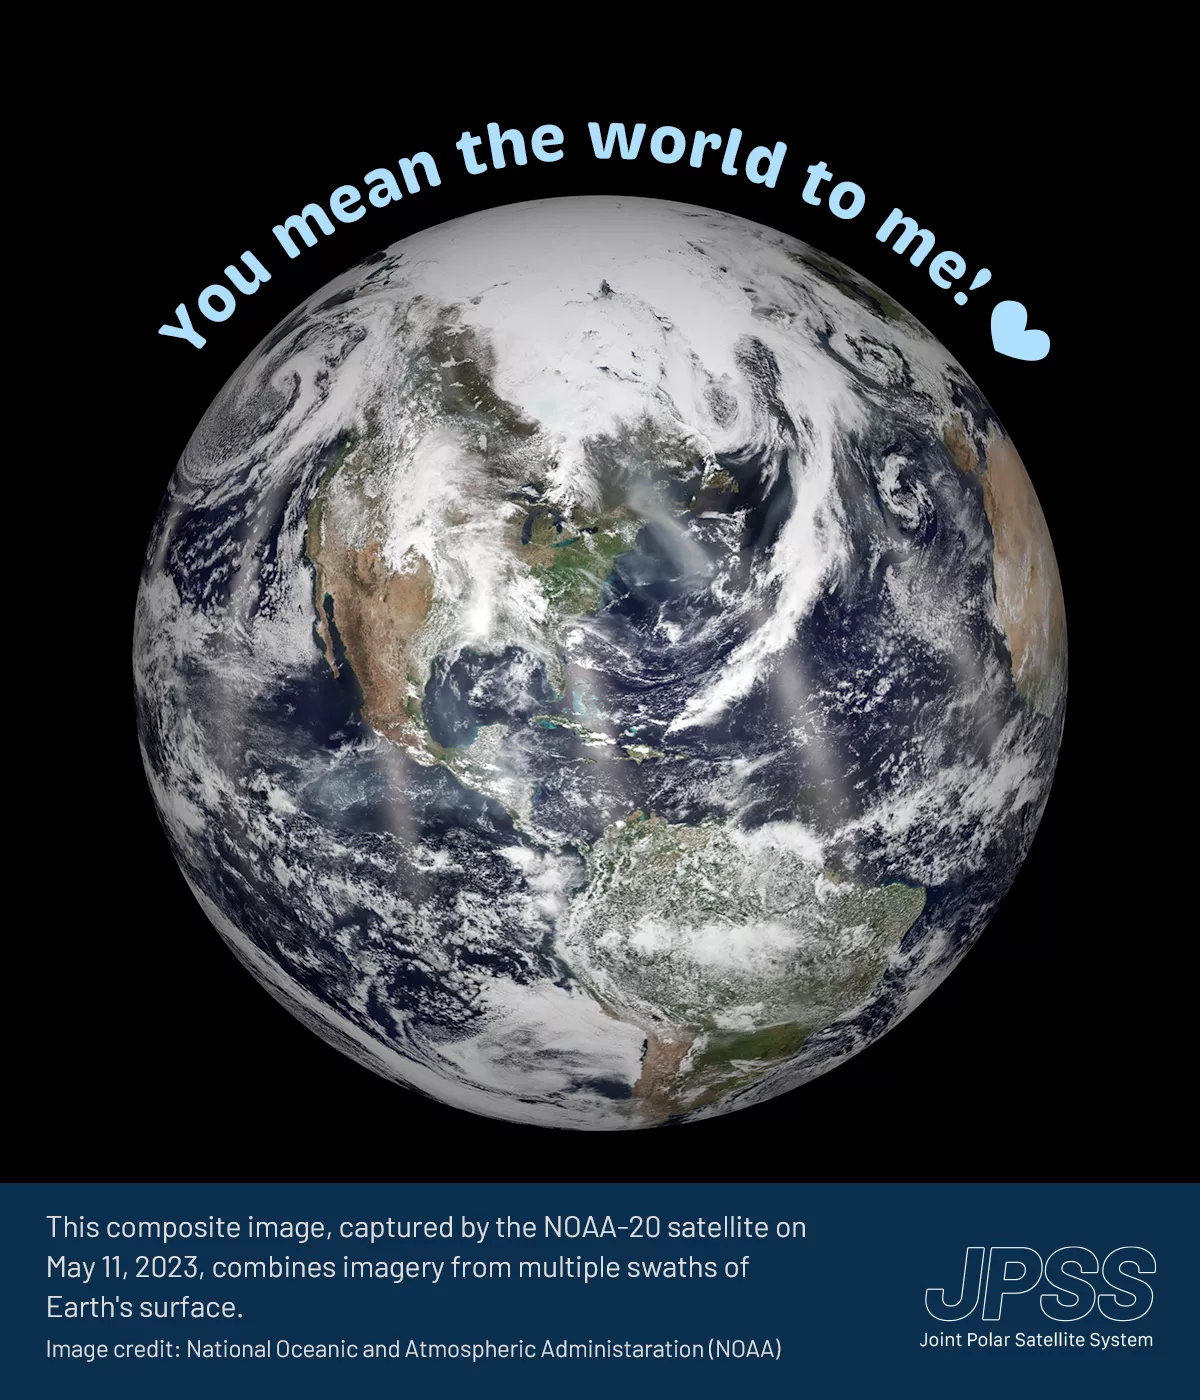 A Valentine's Day card displays a detailed image of Earth, prominently showing the Northern Hemisphere. Arched around the top par of the Earth, the text "You mean the world to me!" is seen accompanied by a small blue heart. The lower caption reads, “This composite image, captured by the NOAA-20 satellite on May 11, 2023, combines imagery from multiple swaths of Earth's surface. Image credit: National Oceanic and Atmospheric Administration (NOAA)” In the bottom right corner of the card there is a wordmark fo